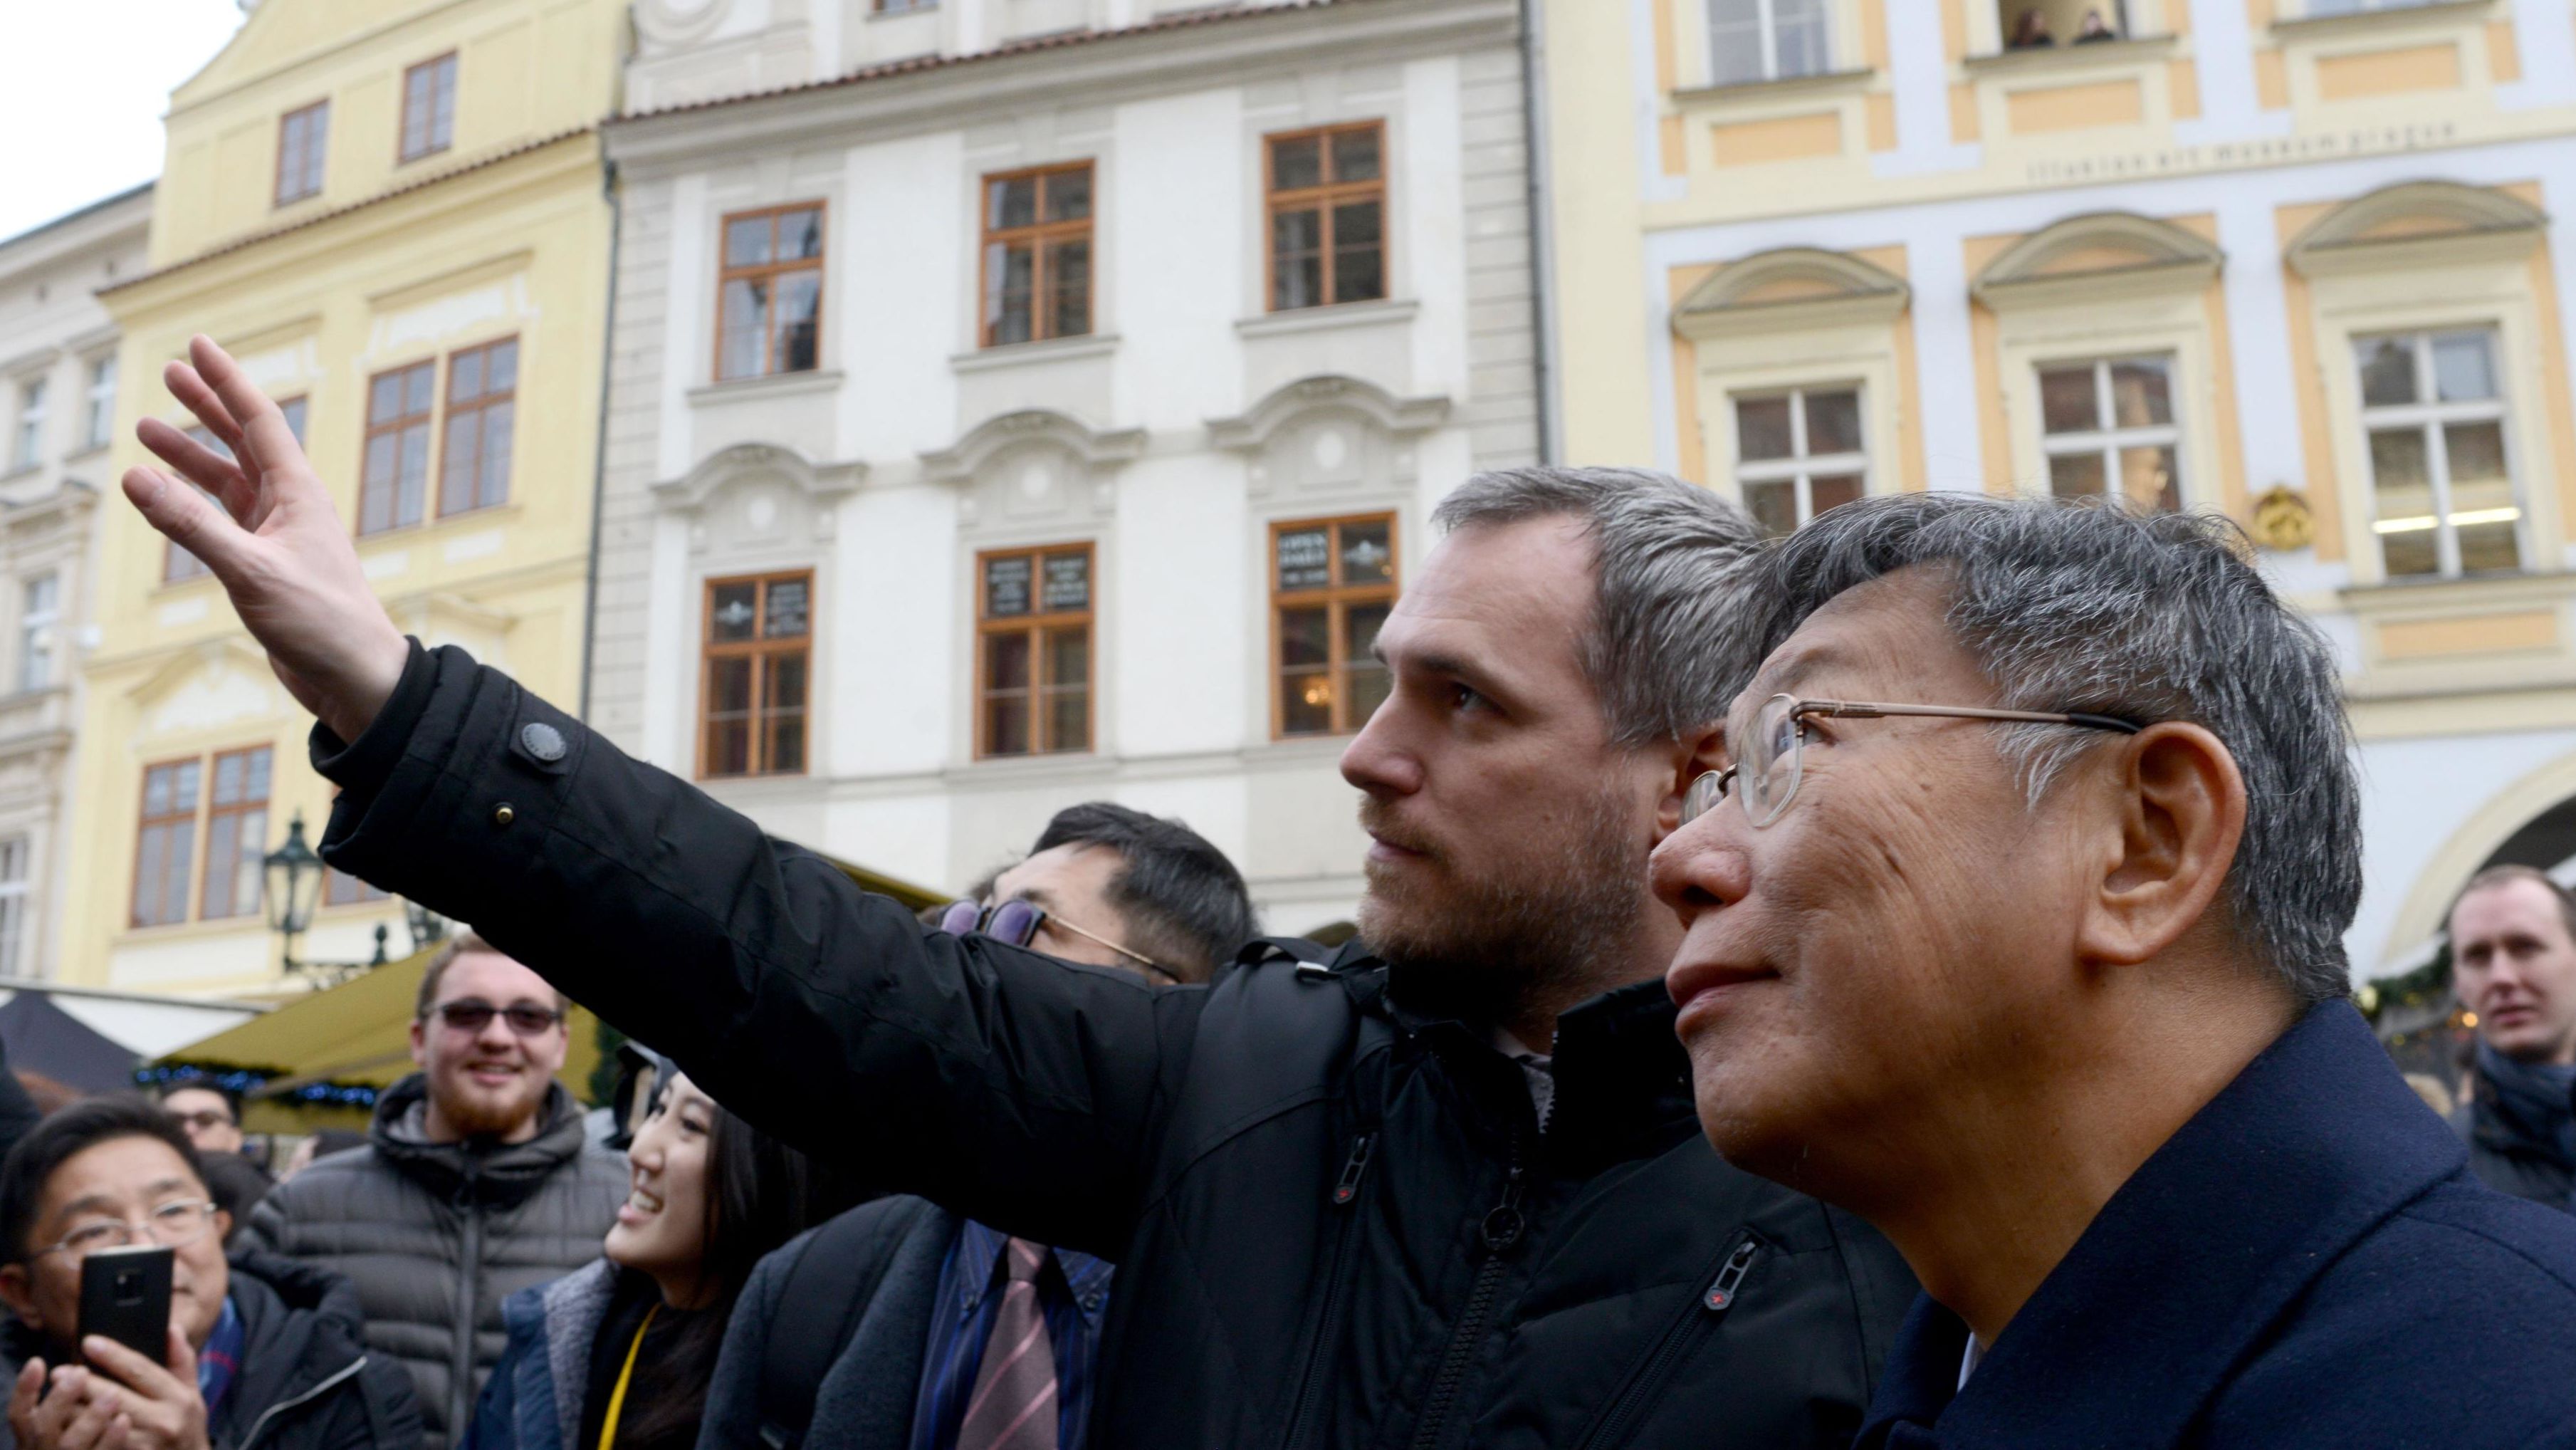 The mayors of Prague and Taipei walk through Prague's Old Town Square on January 13, 2020.